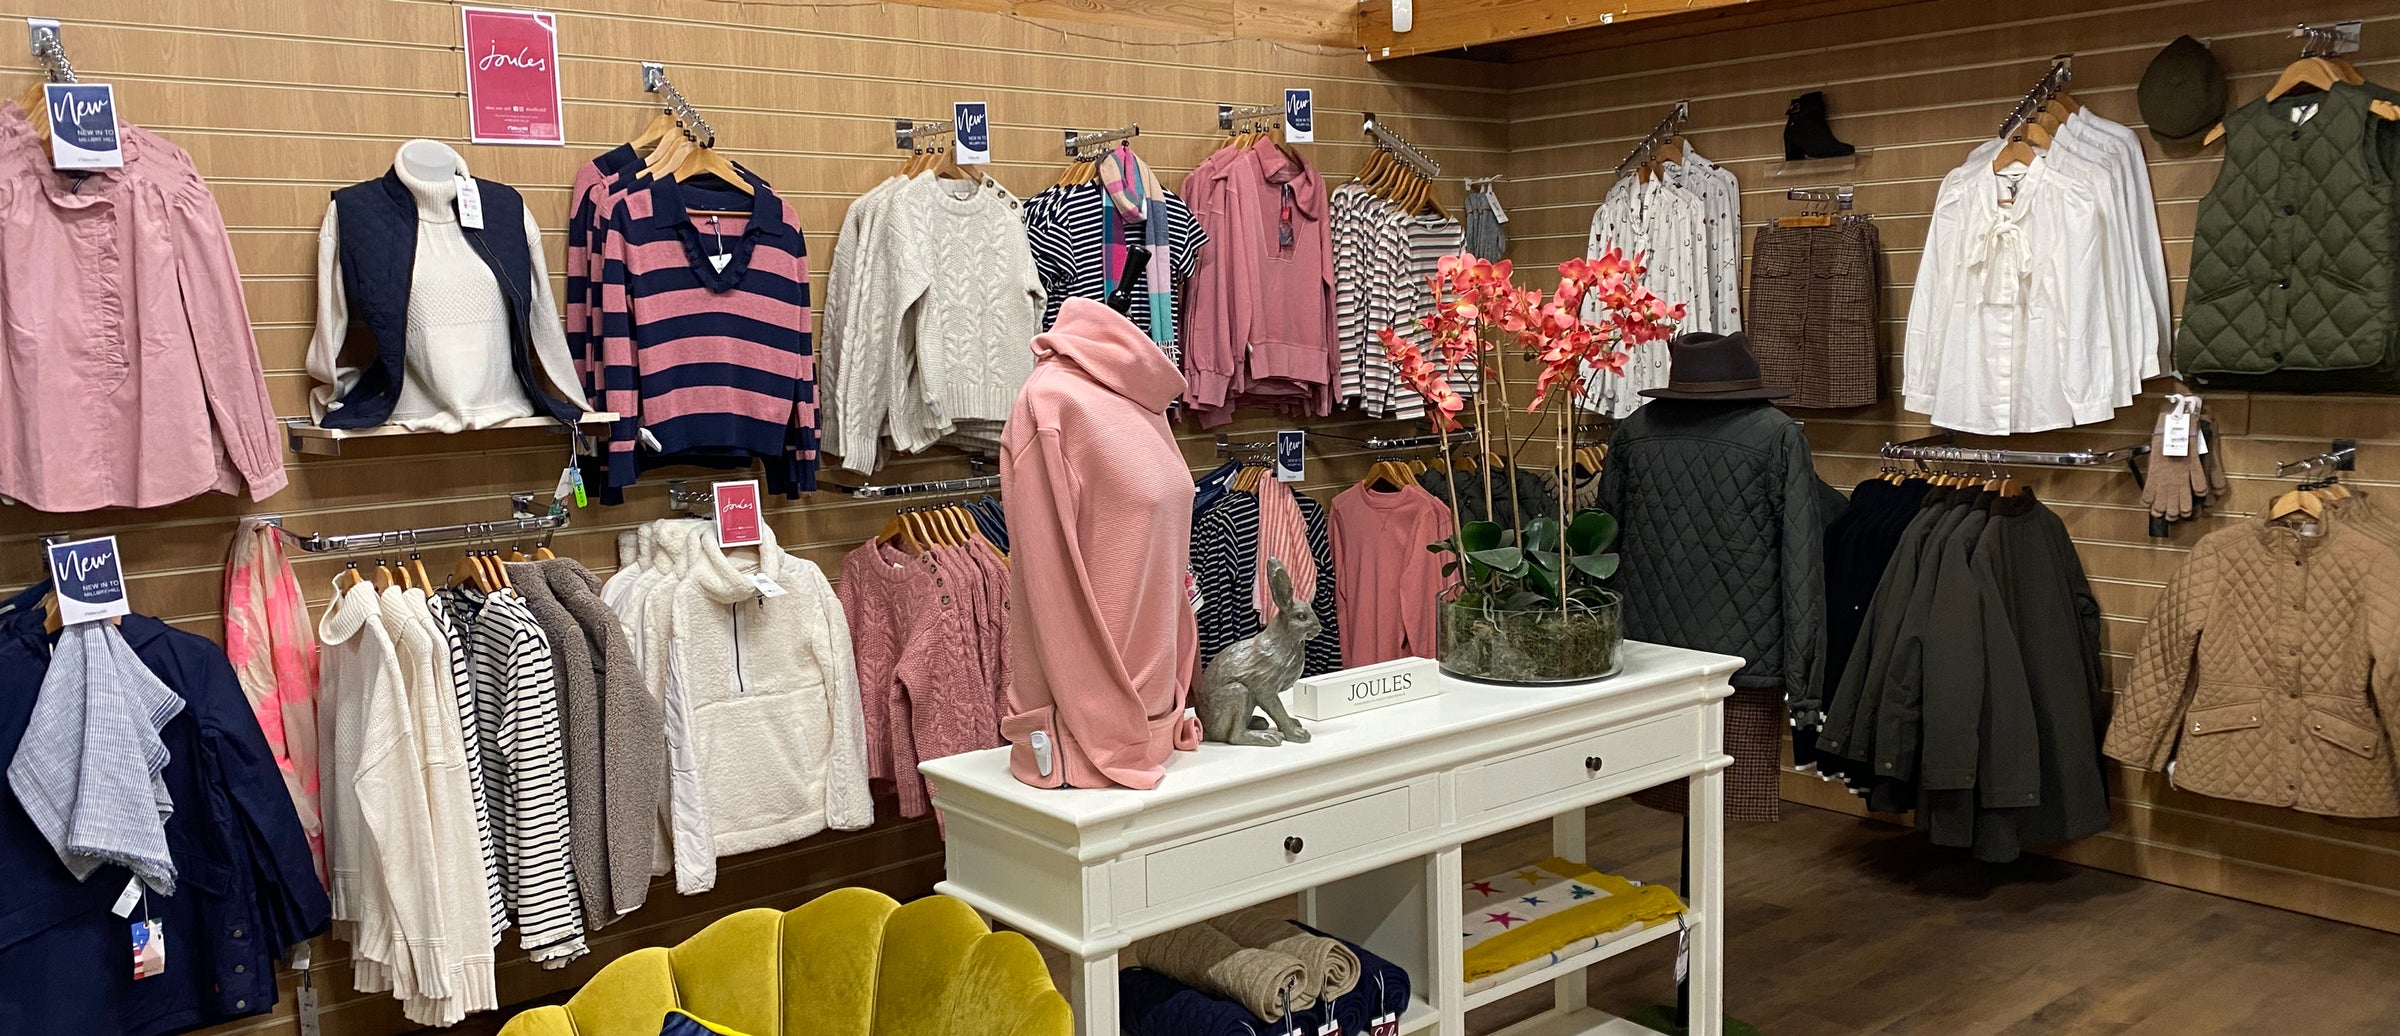 Millbry Hill Richmond Store Joules Clothing Department